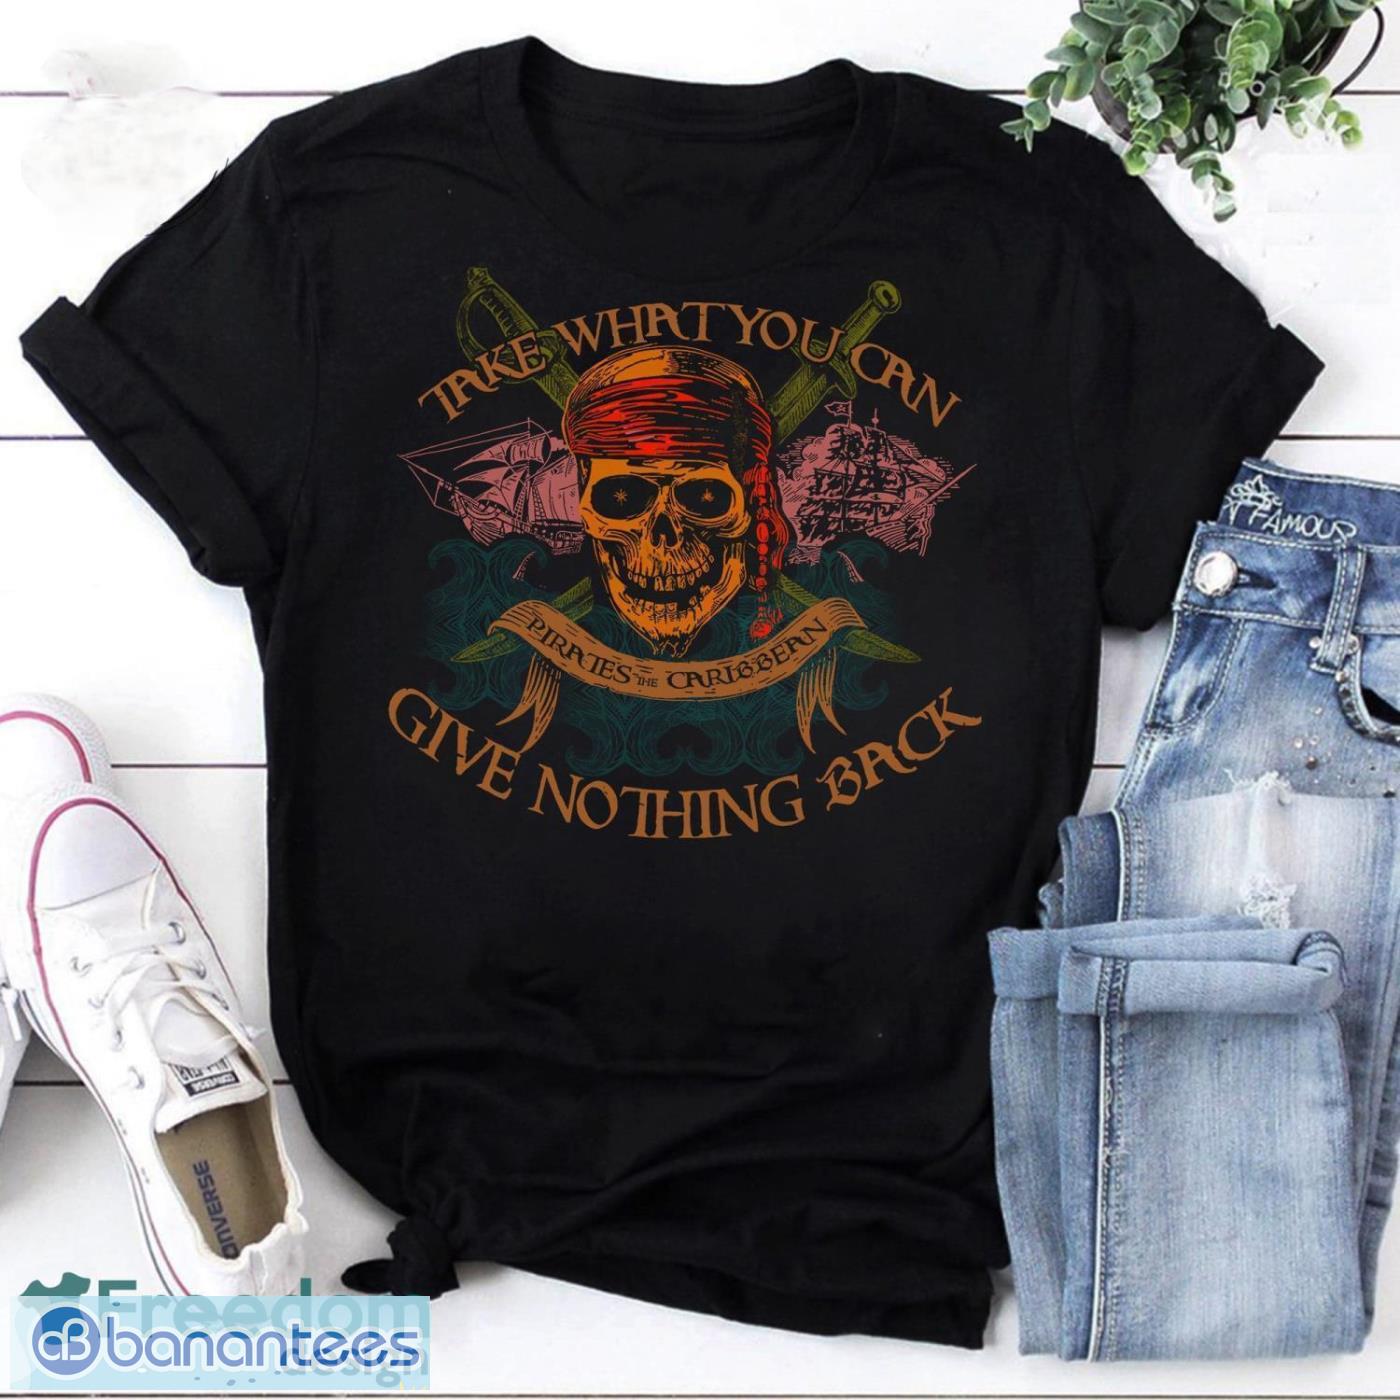 Pirates The Caribbean Take What You Can Give Nothing Back Vintage T-Shirt  Pirates The Caribbean Shirt - Banantees